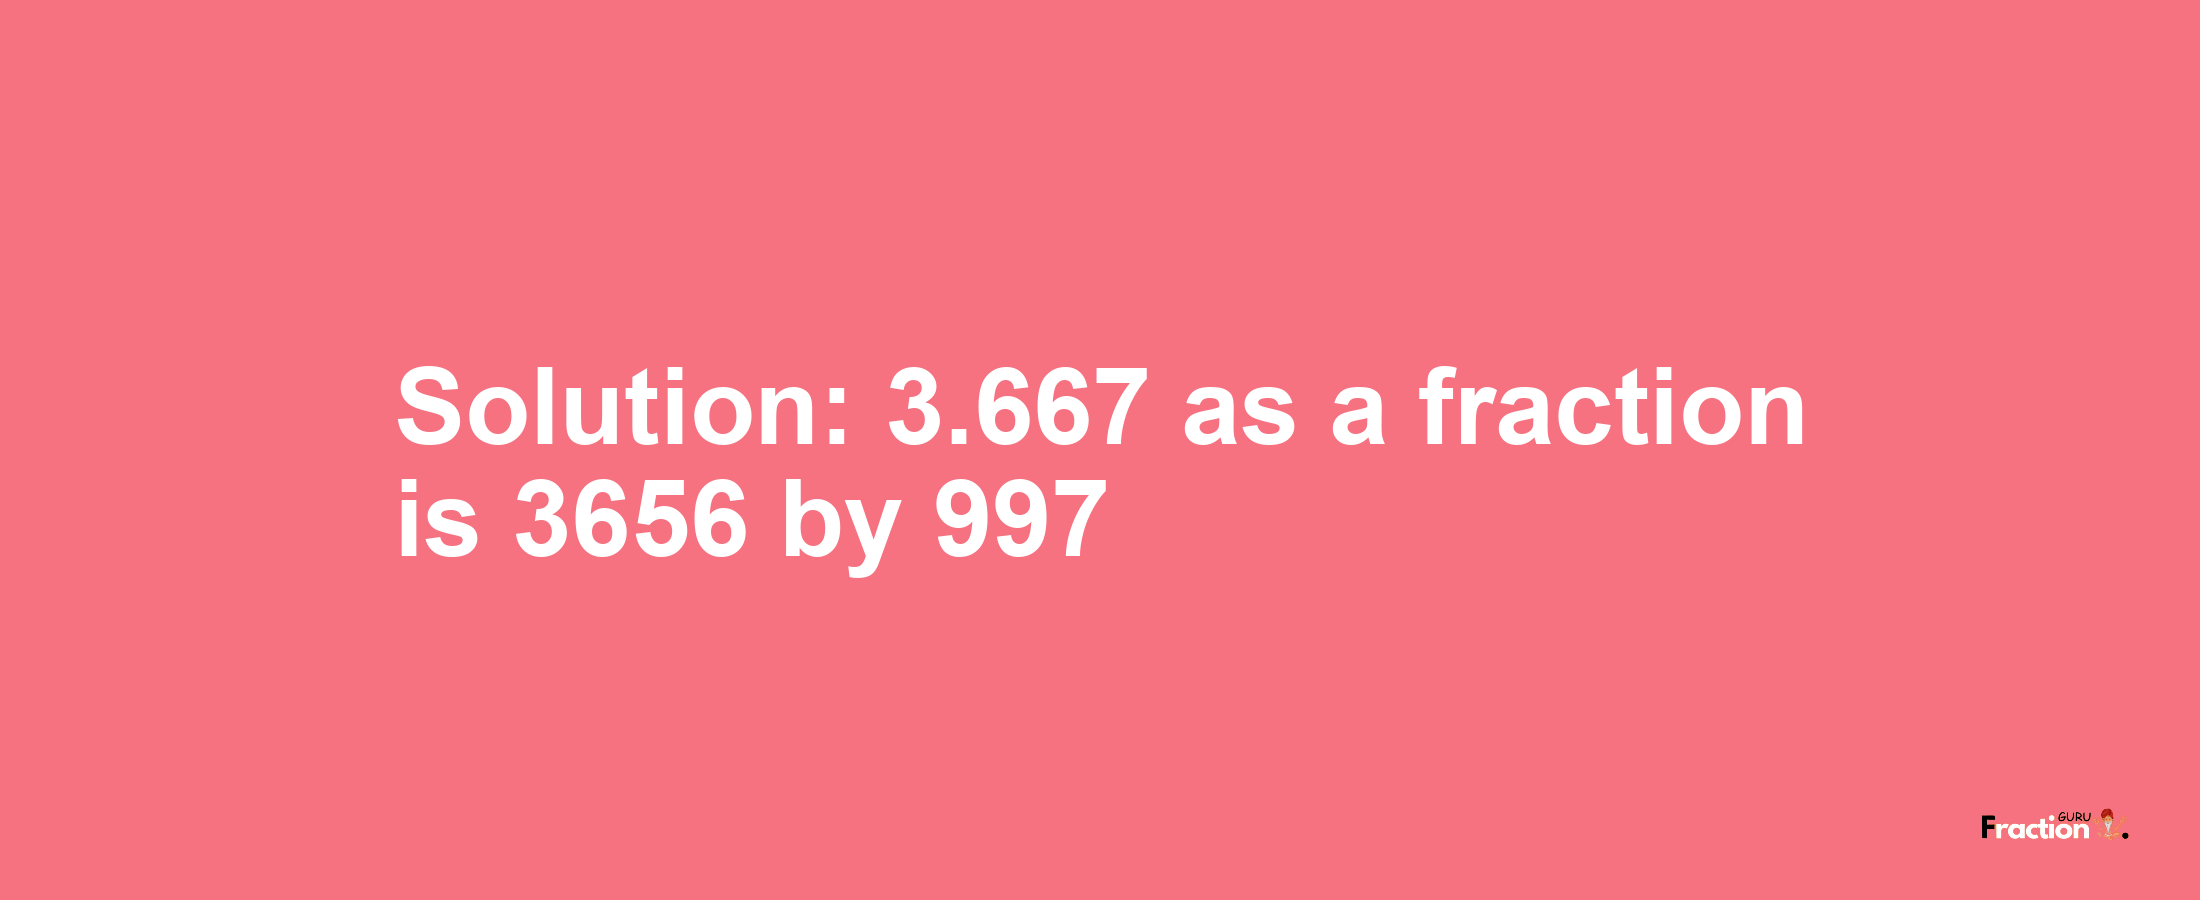 Solution:3.667 as a fraction is 3656/997